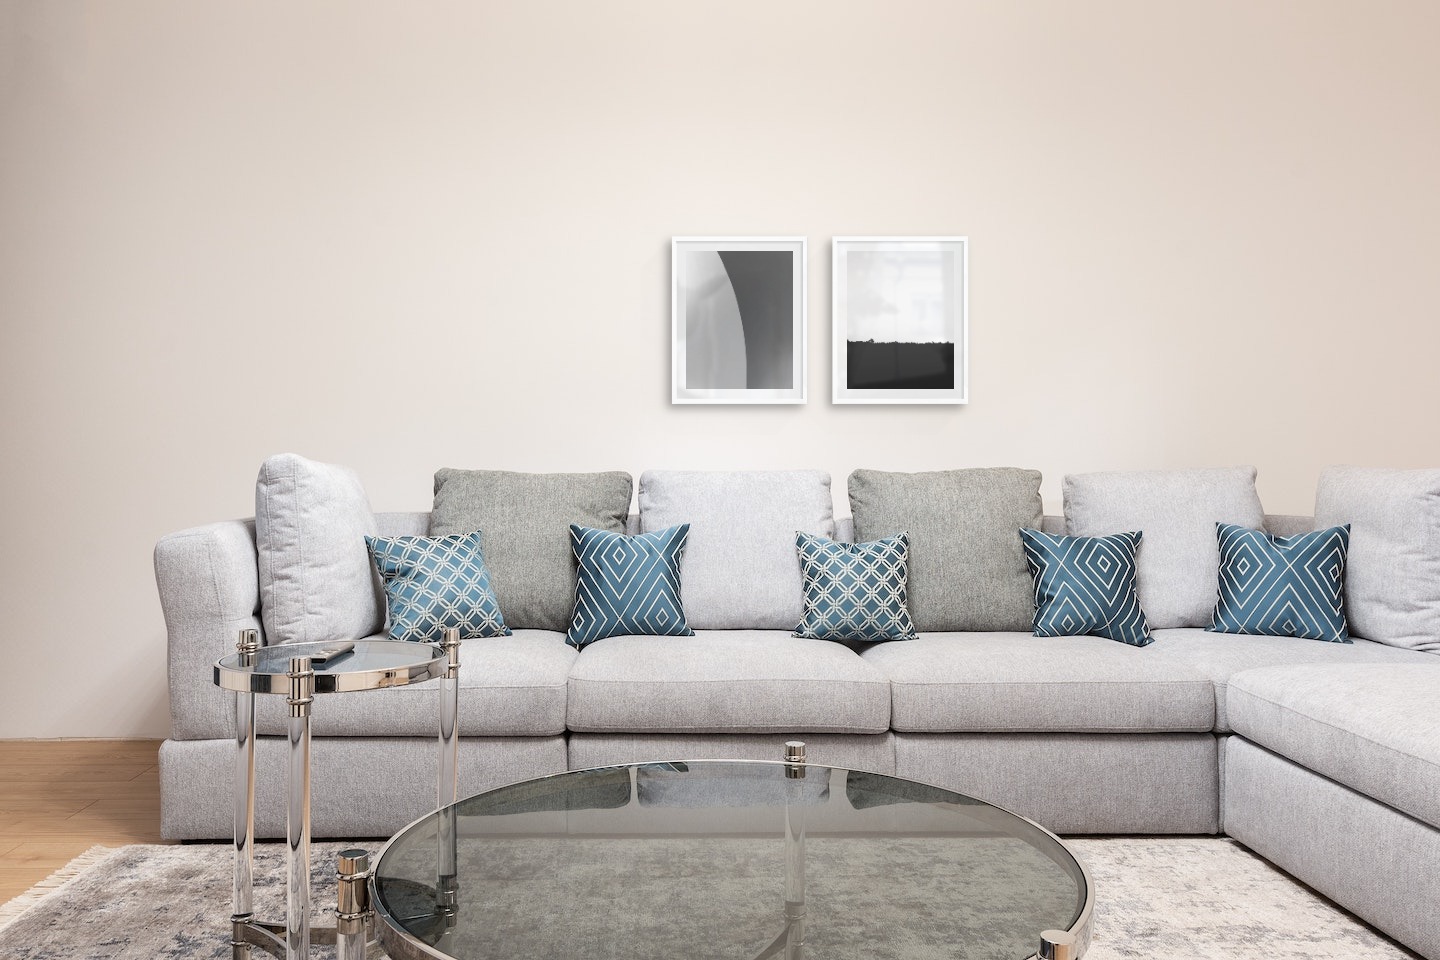 Gallery wall with picture frames in white in sizes 40x50 with prints "Line" and "Sky above trees"